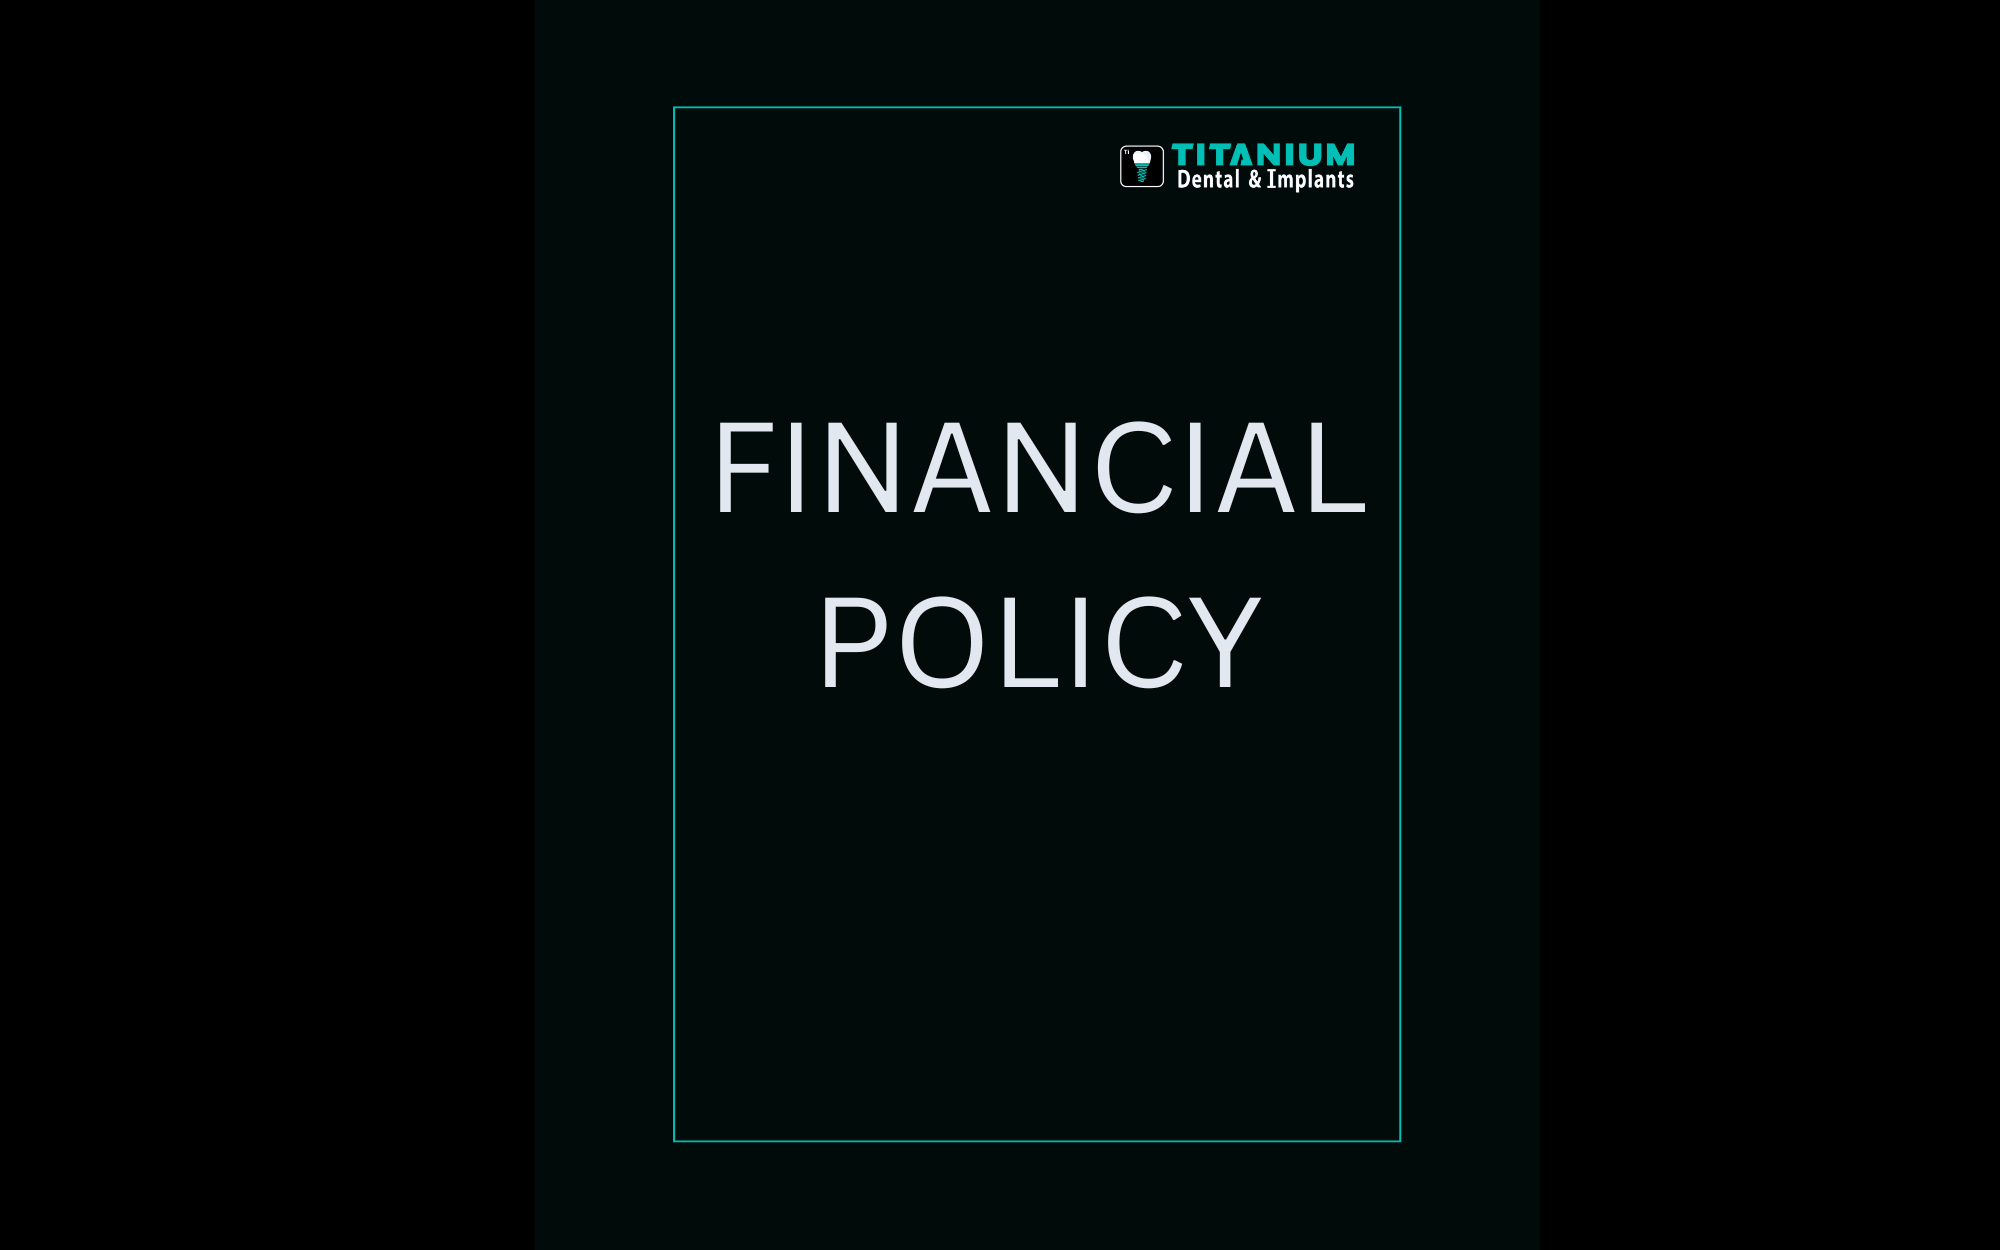 FINANCIAL POLICY